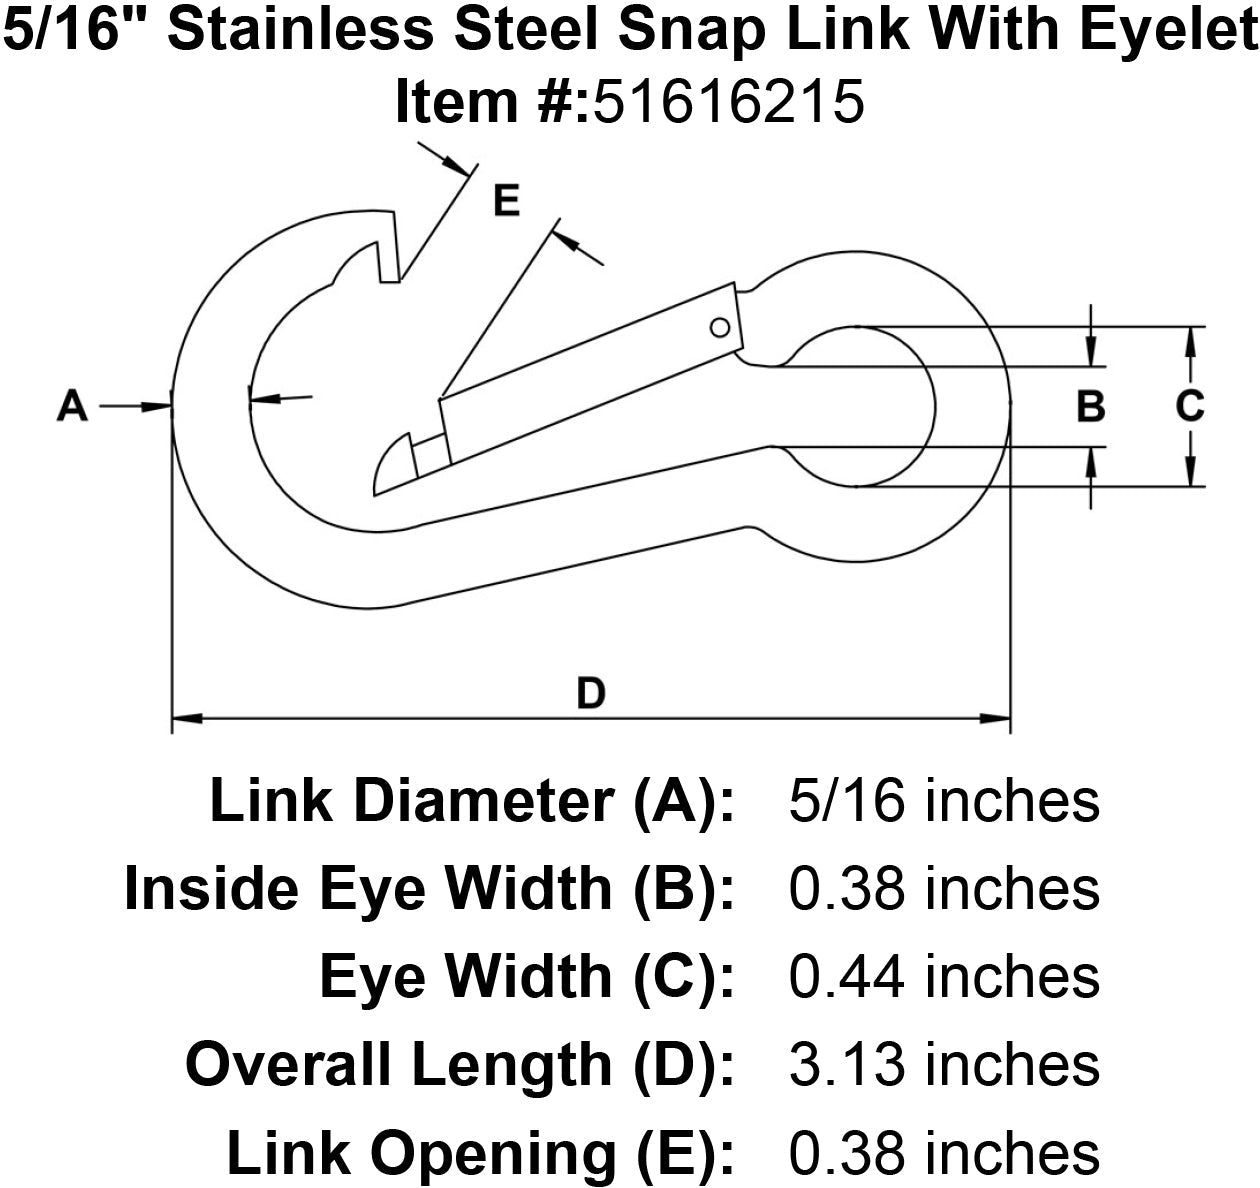 Stainless Snap Links With Eyelet